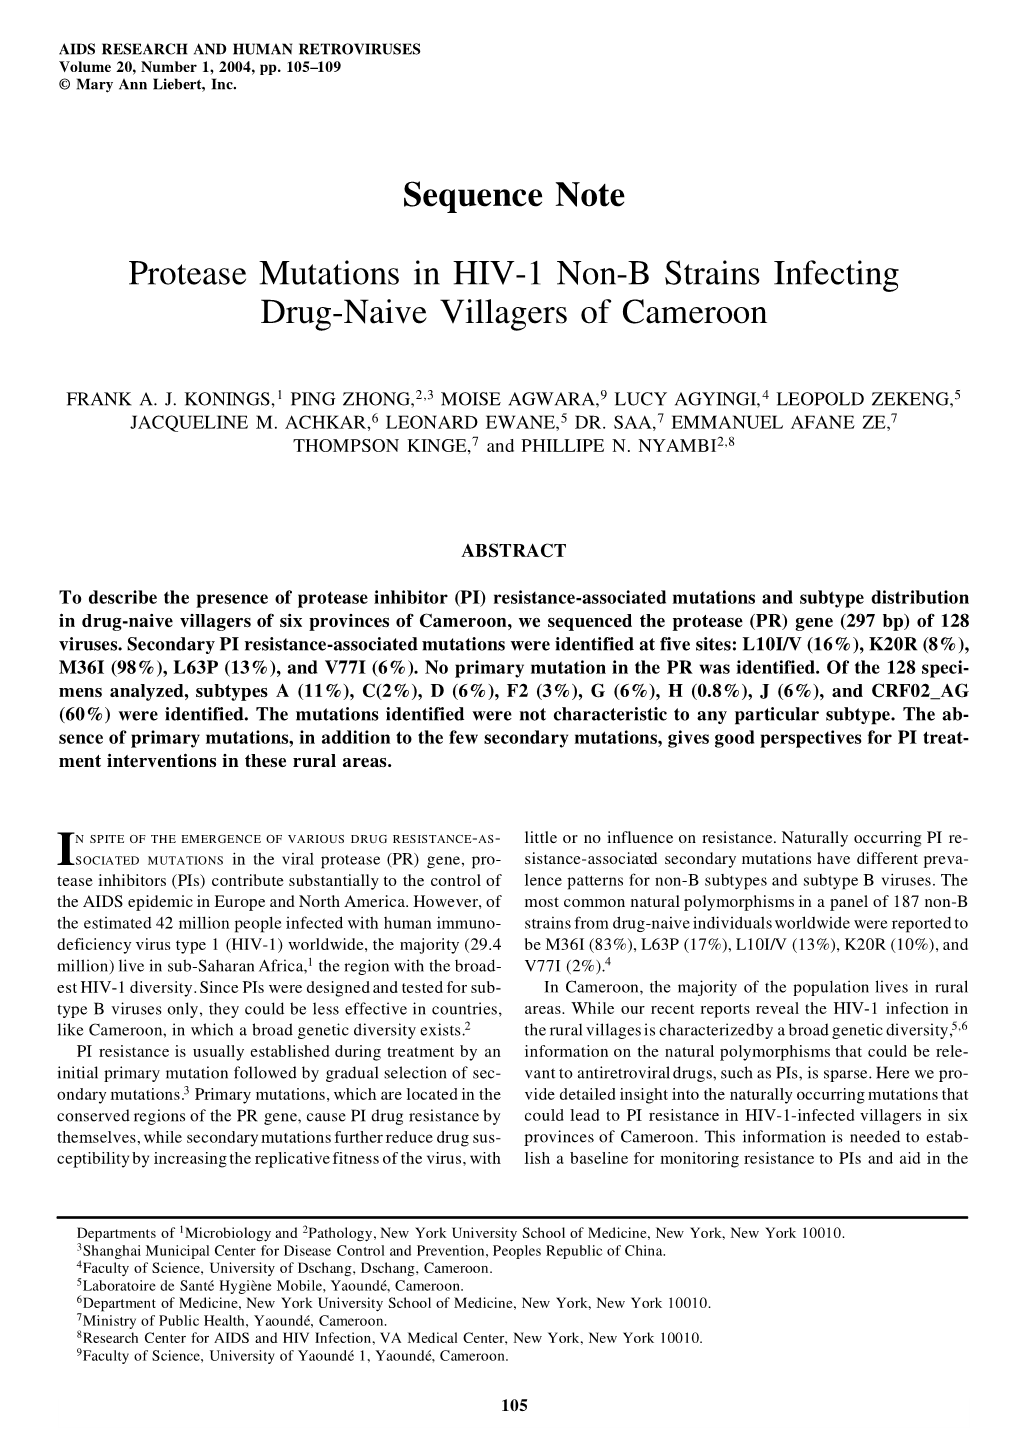 Protease Mutations in HIV-1 Non-B Strains Infecting Drug-Naive Villagers of Cameroon